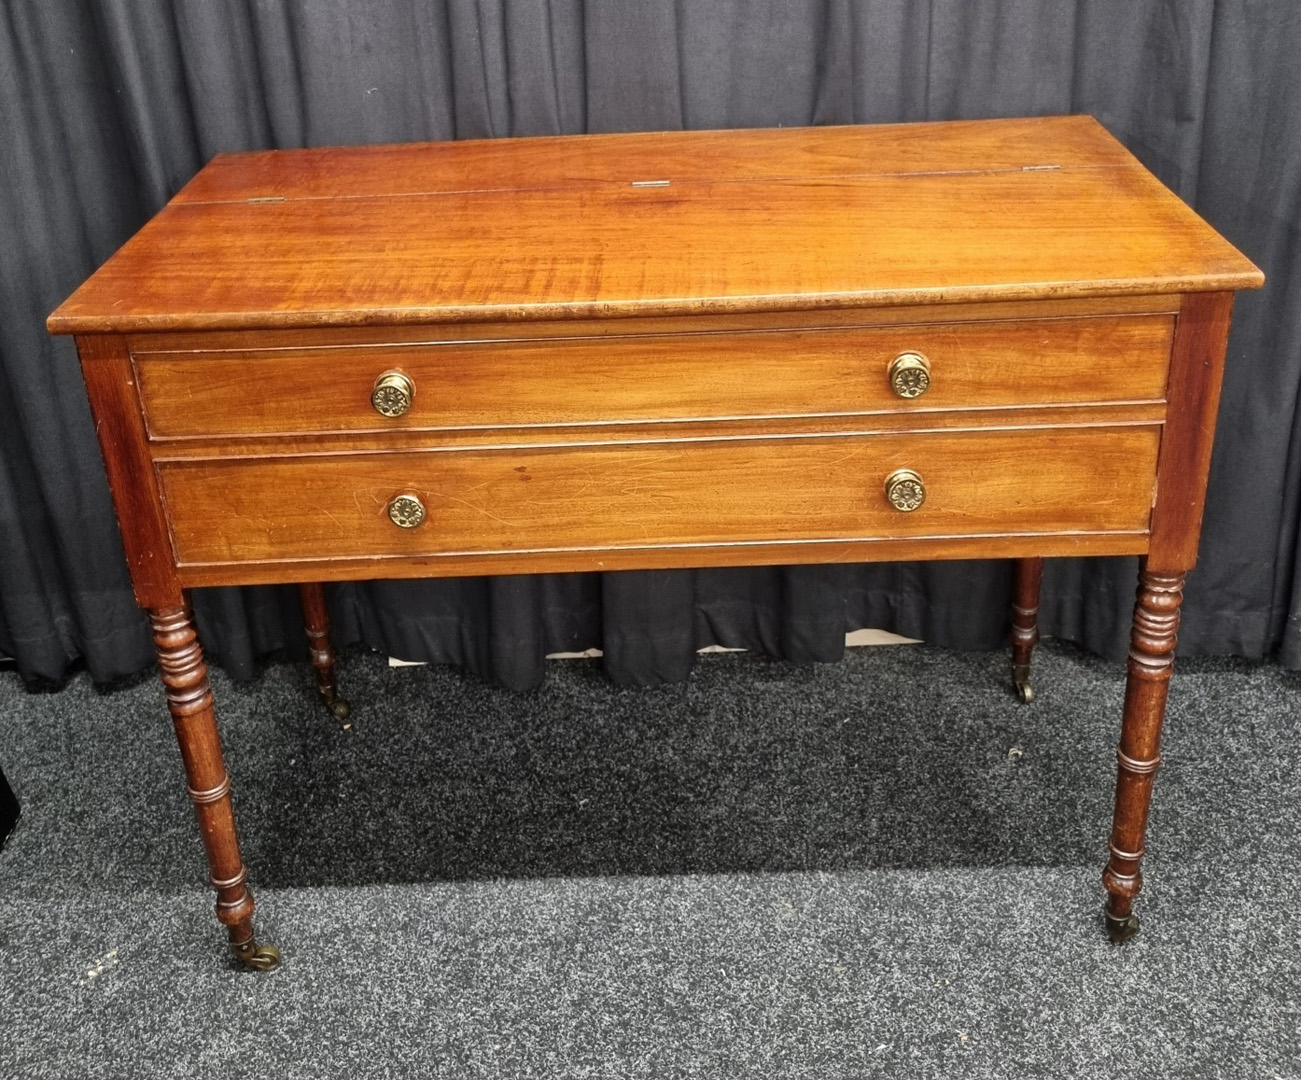 An 1840 mahogany piano forte converted to side table, with lifting lid and faux drawers with brass